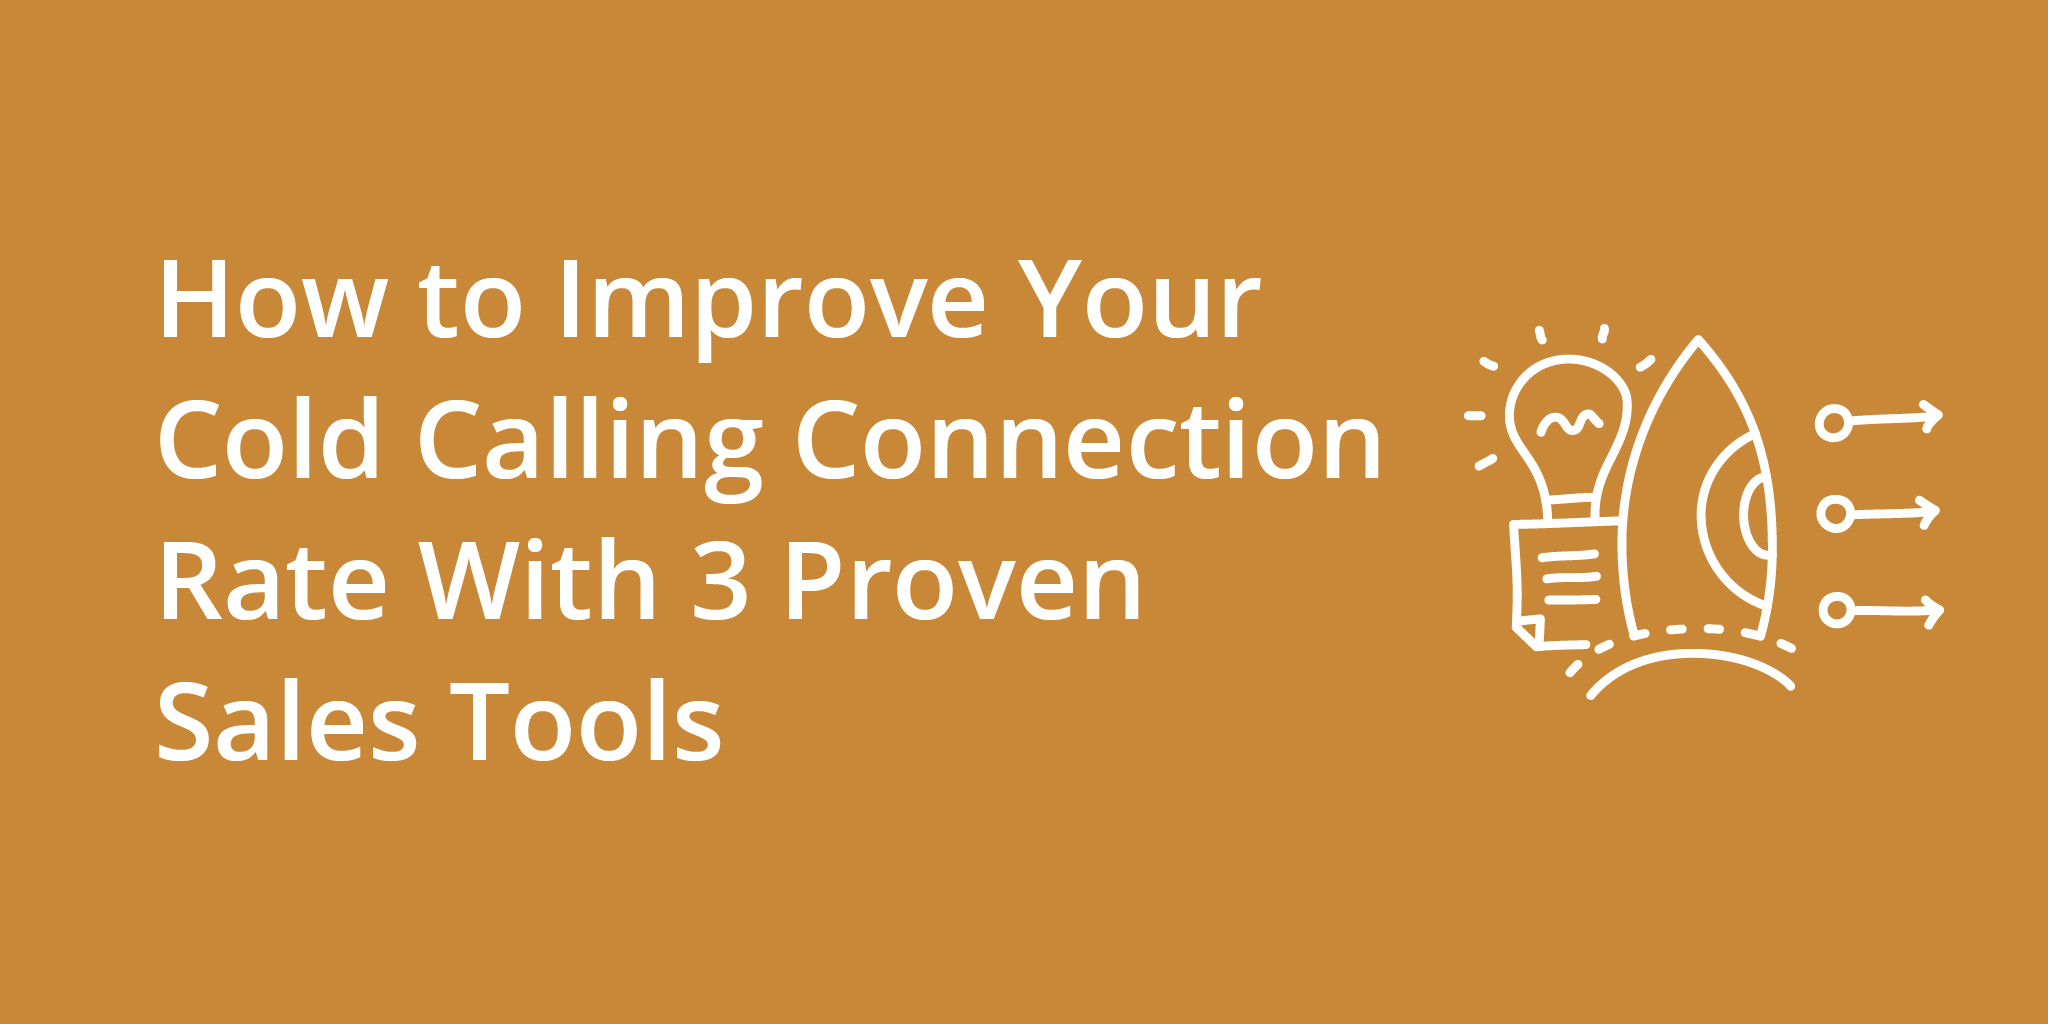 How to Improve Your Cold Calling Connection Rate With 3 Proven Sales Tools | Telephones for business